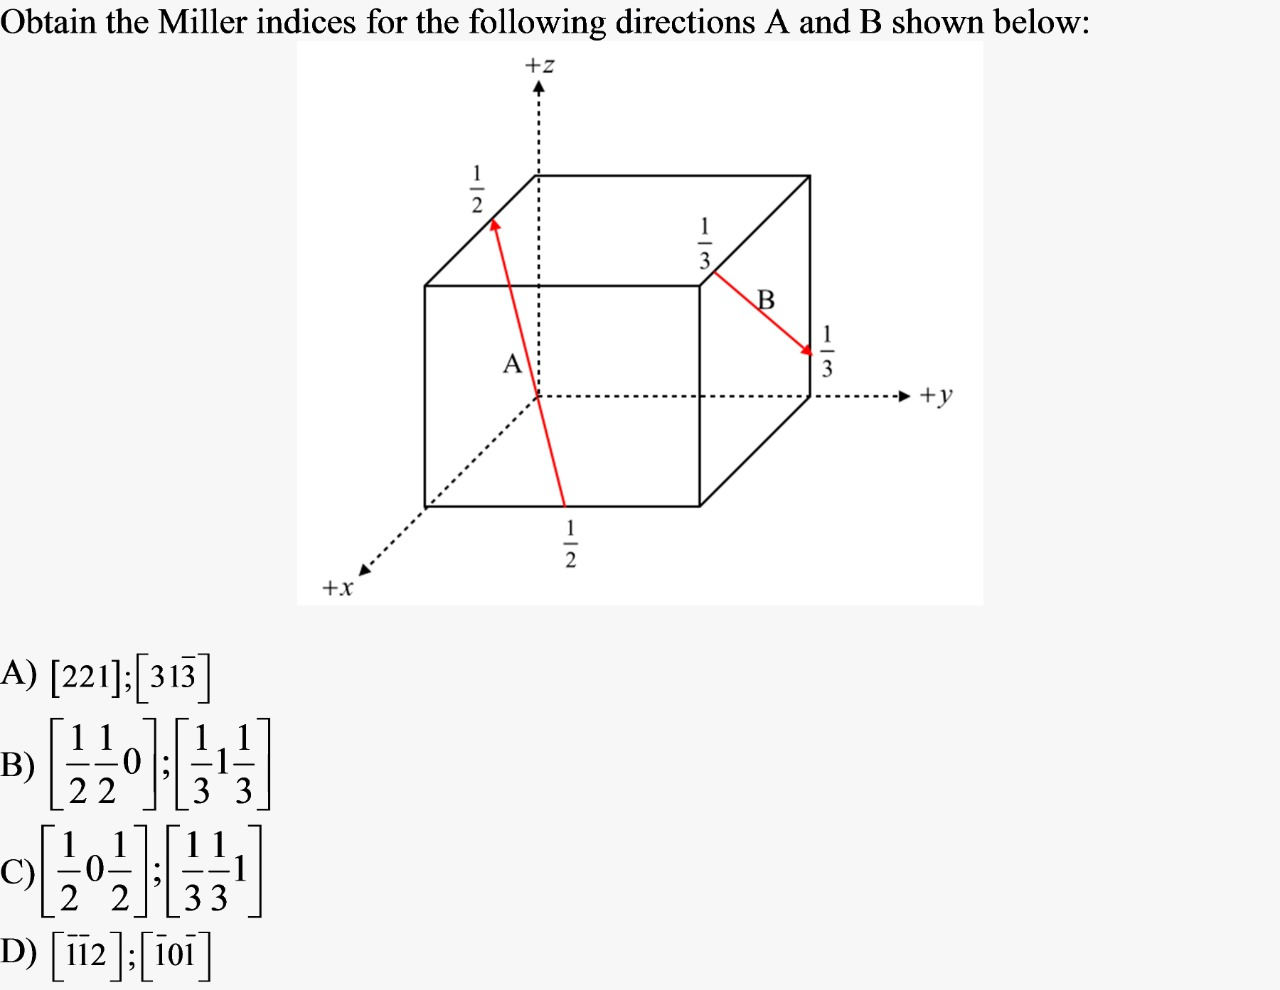 Obtain the Miller indices for the following directions A and B shown below:
+z
A
+y
1
+x
A) [221]:[313]
B)
| 2 2
3
C)
0-
2 2
33
D) [i12 |; 10i
1/3
